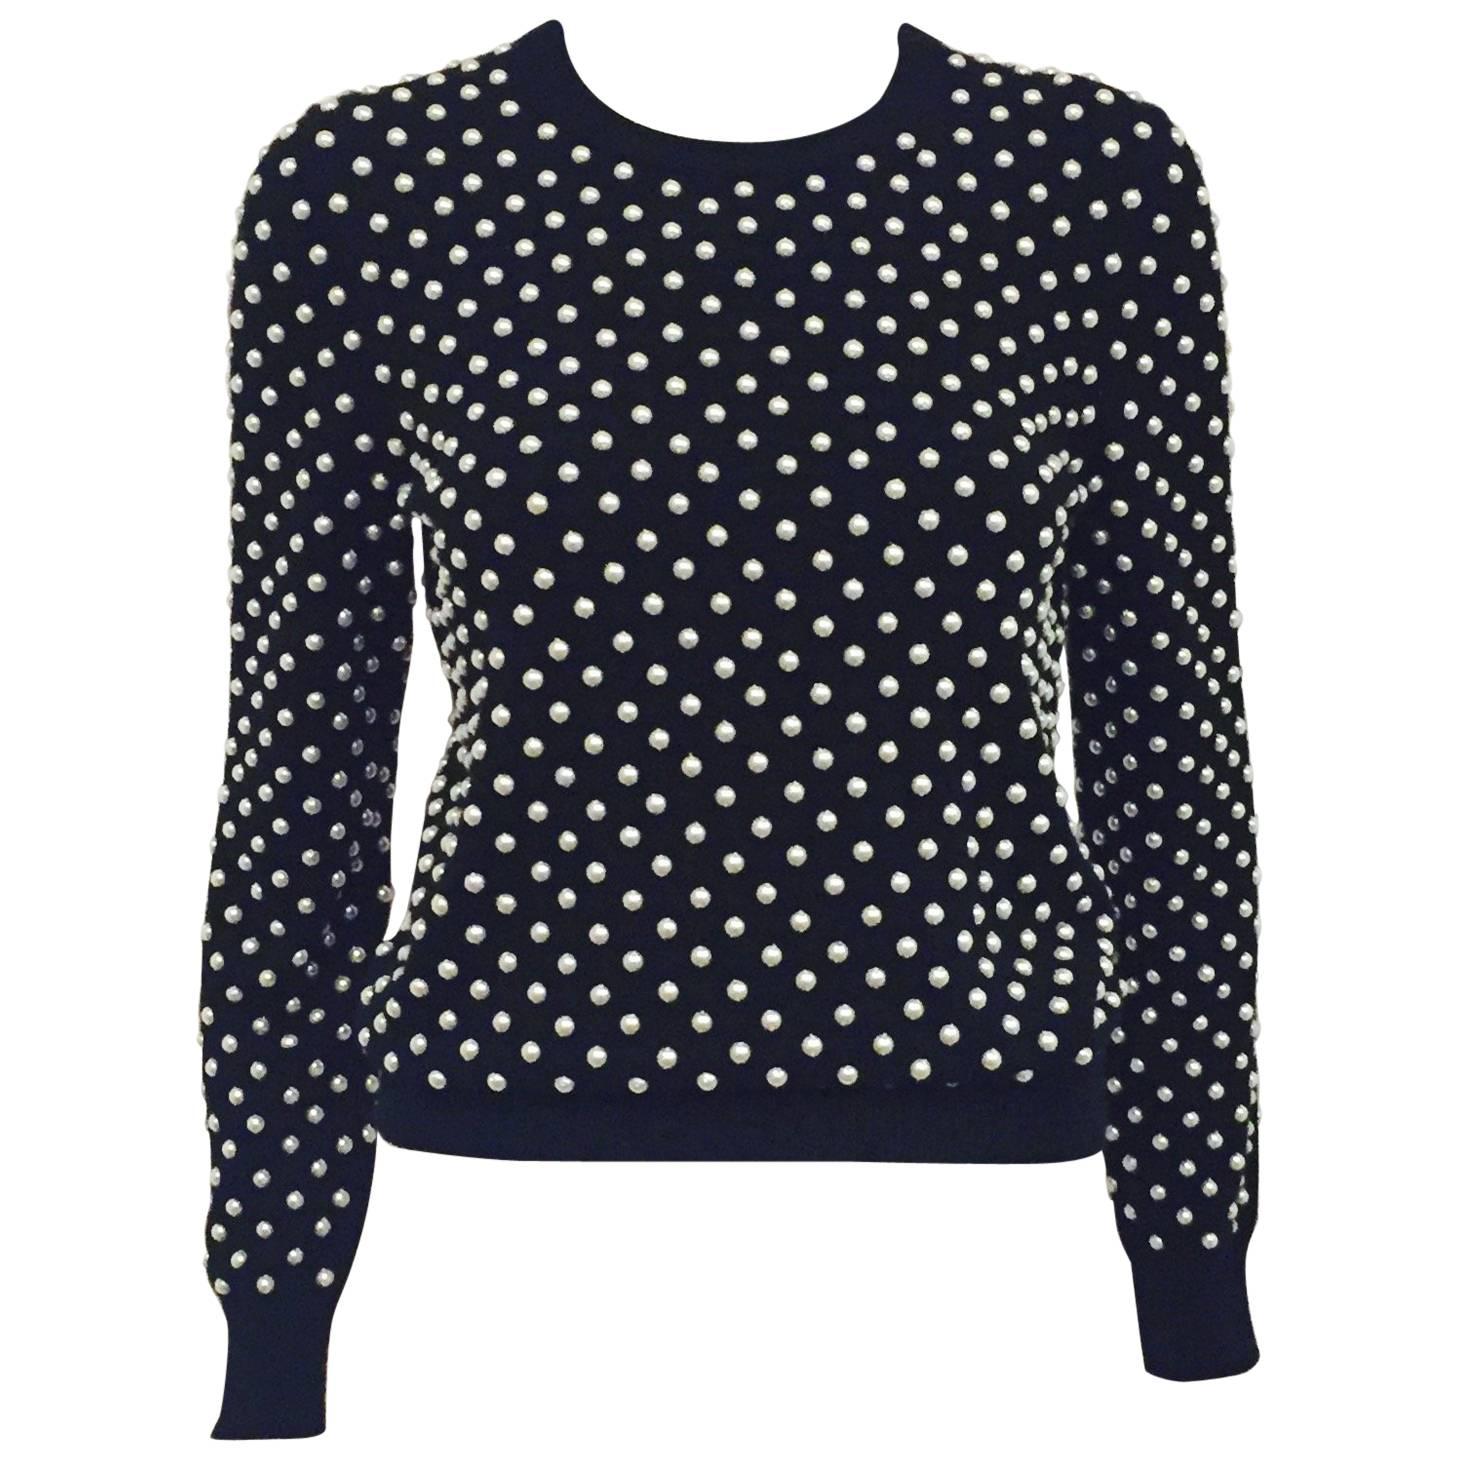  Michael Kors Black Cashmere Pullover With Pearl Beads All over